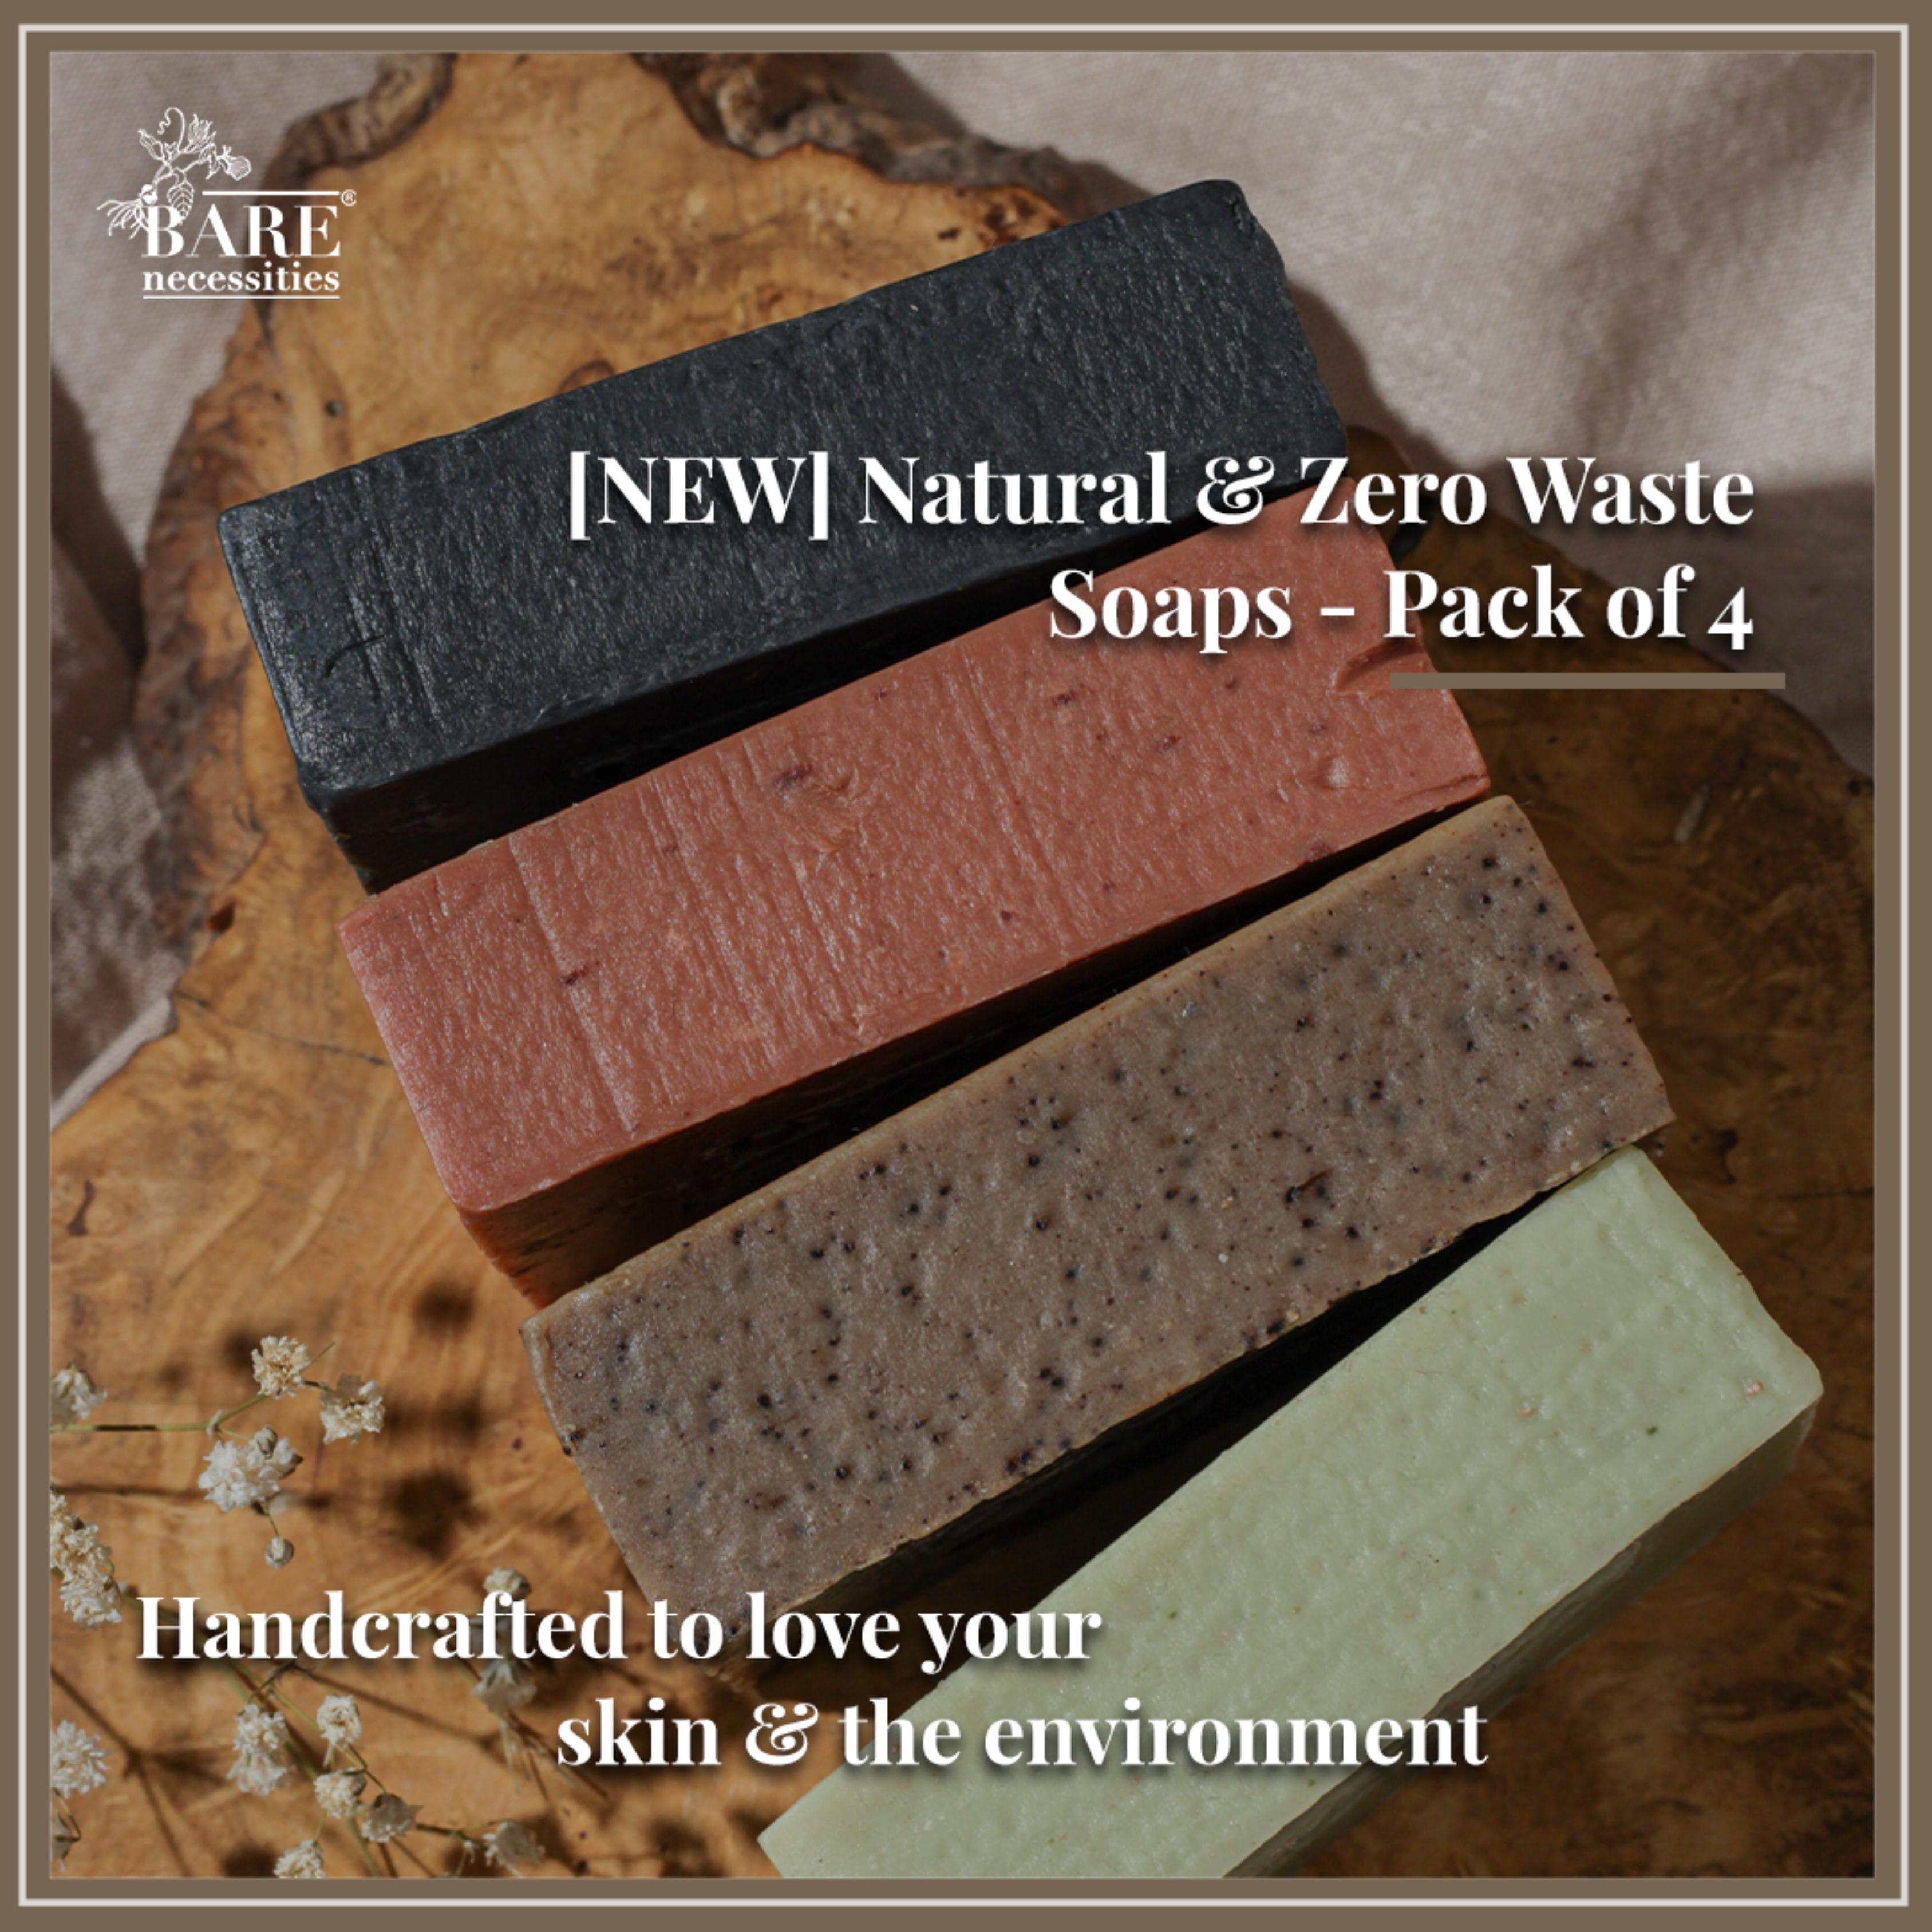 Bare Necessities Spa Bars | Pack of 4 | 300gm